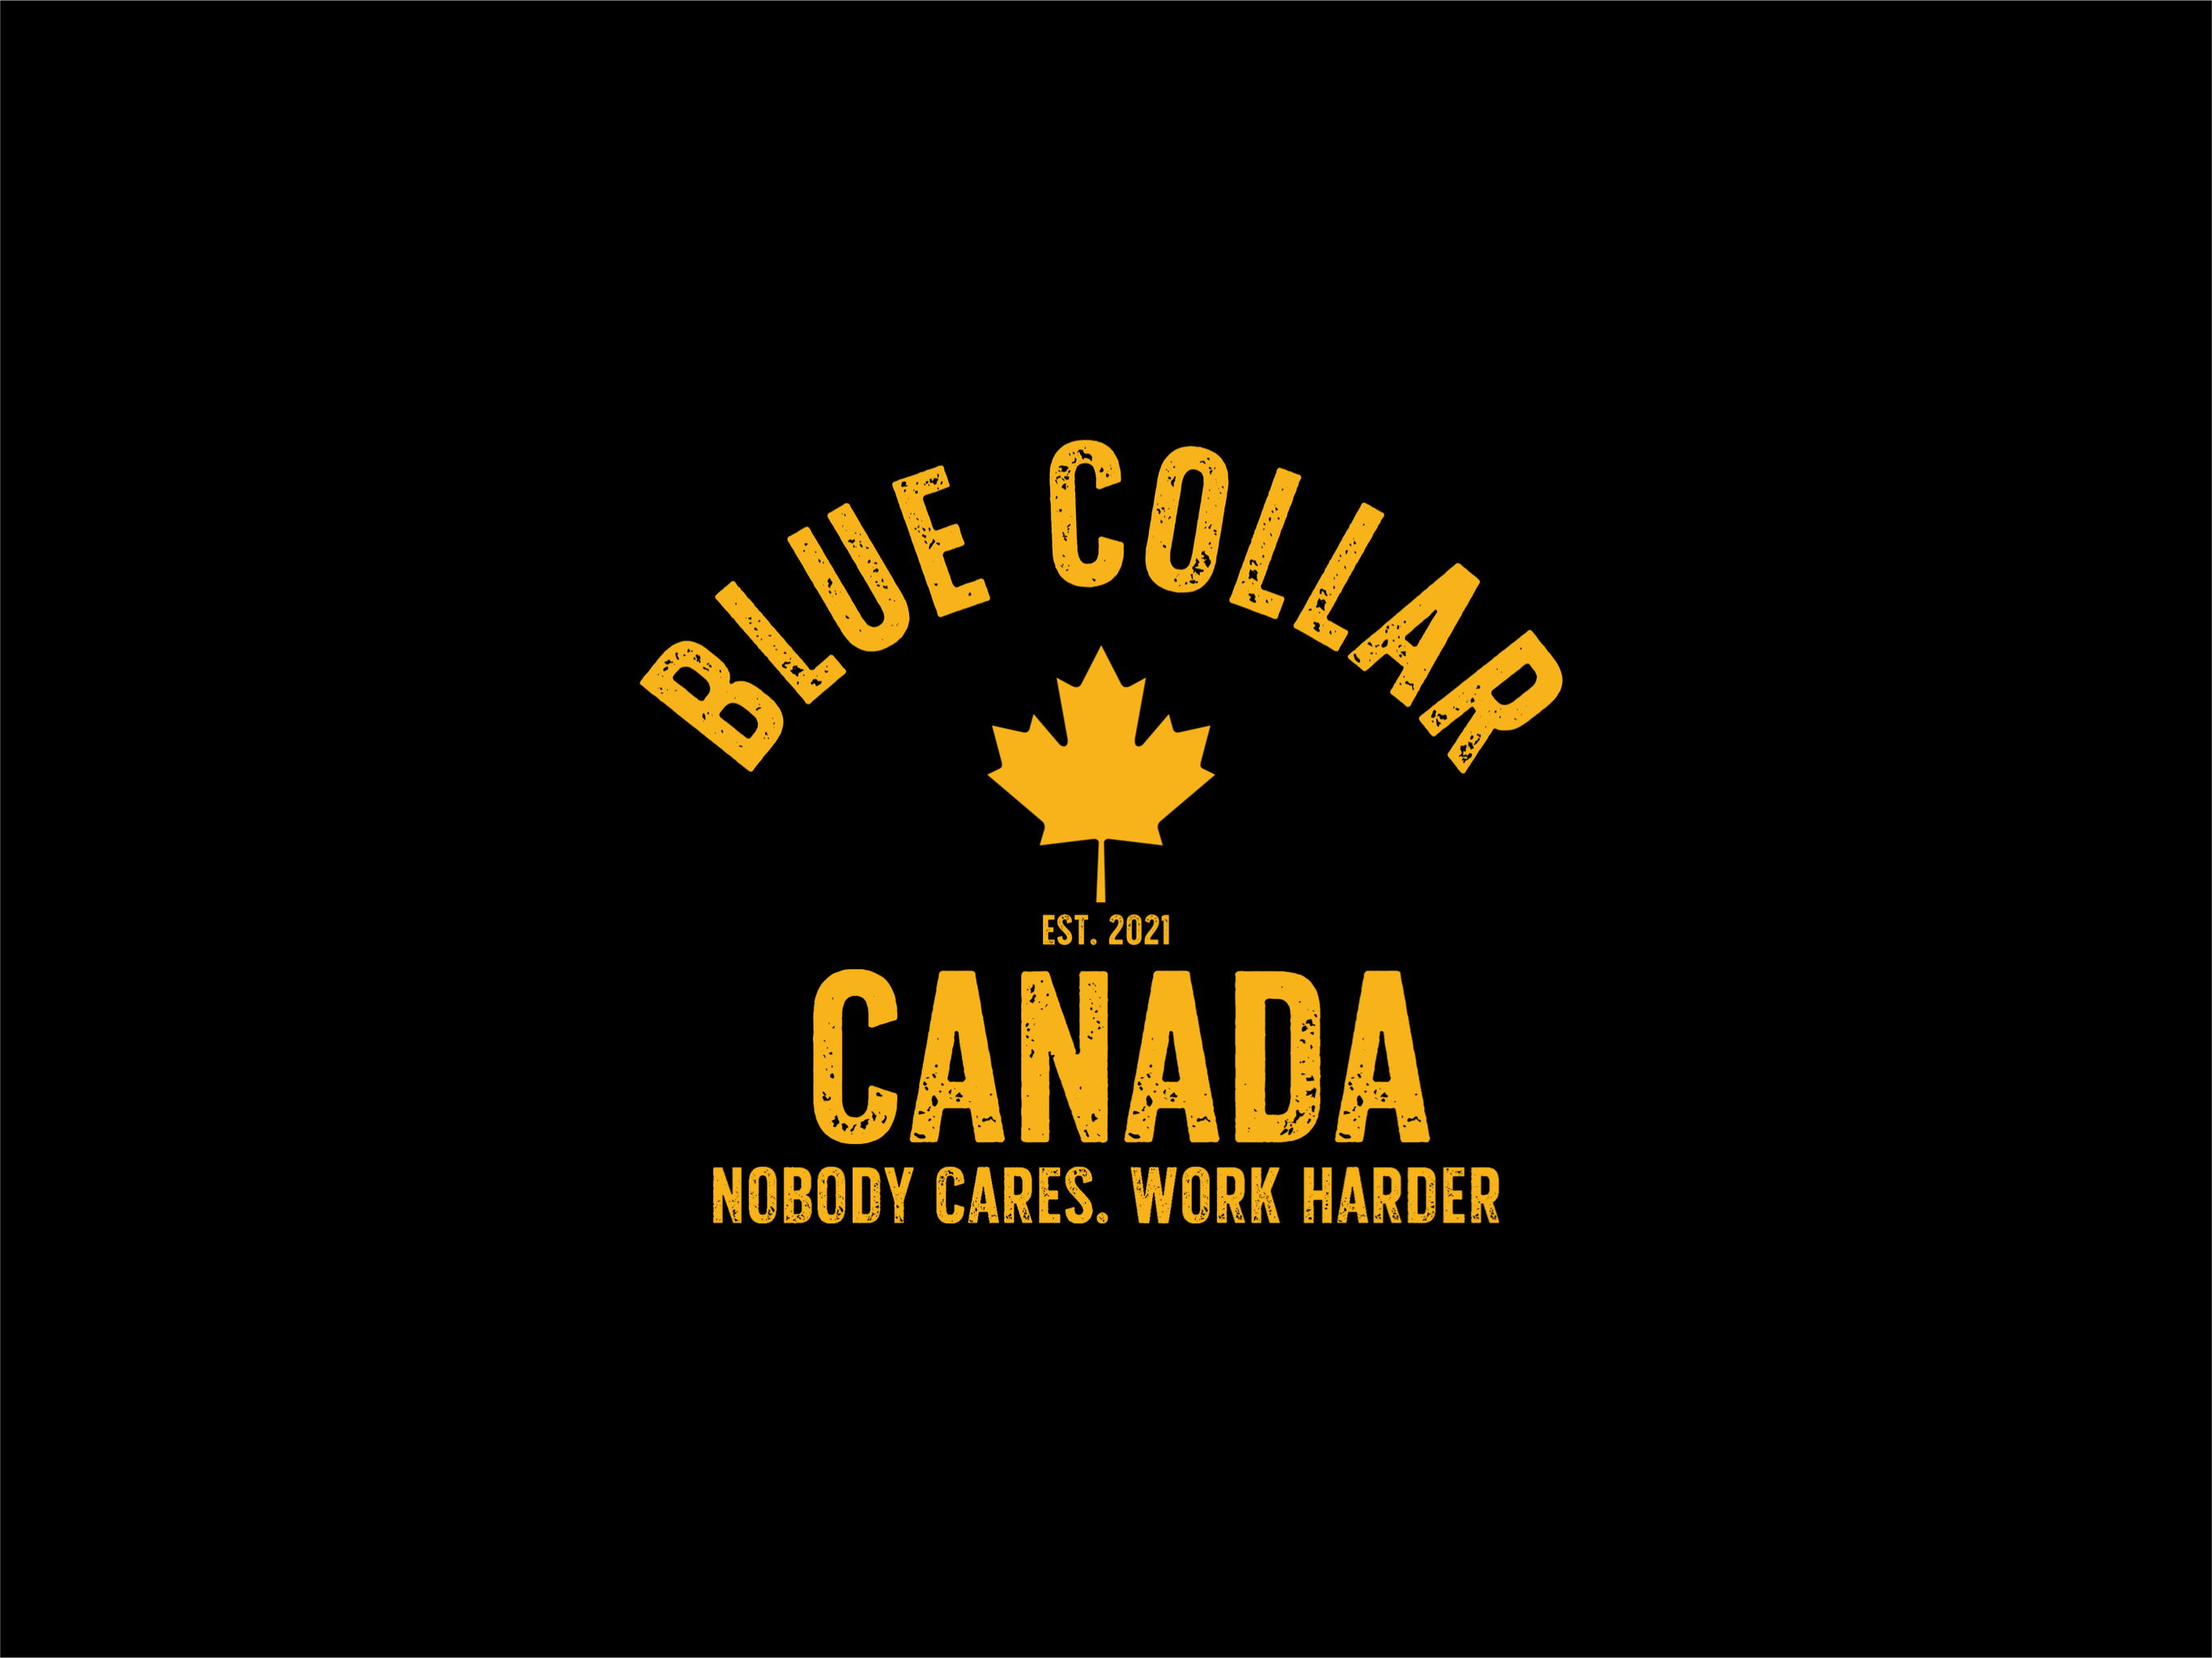 Support Hoodie  Blue Collar Canada